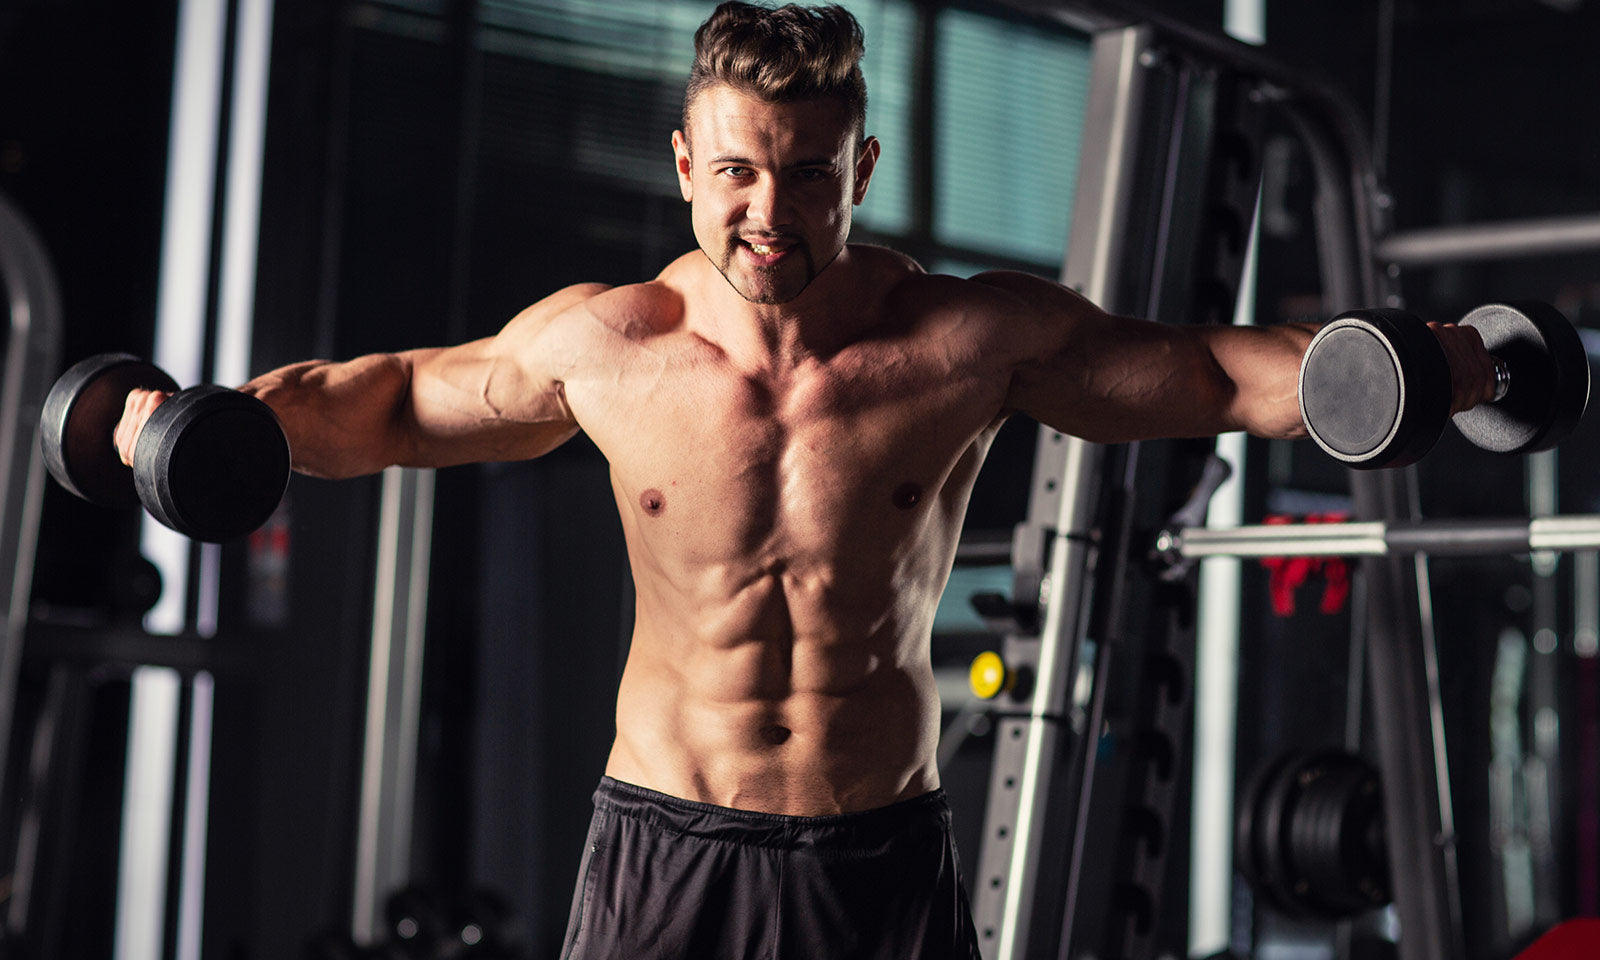 Six Unique Training Techniques to Shock Your Muscles into Growing